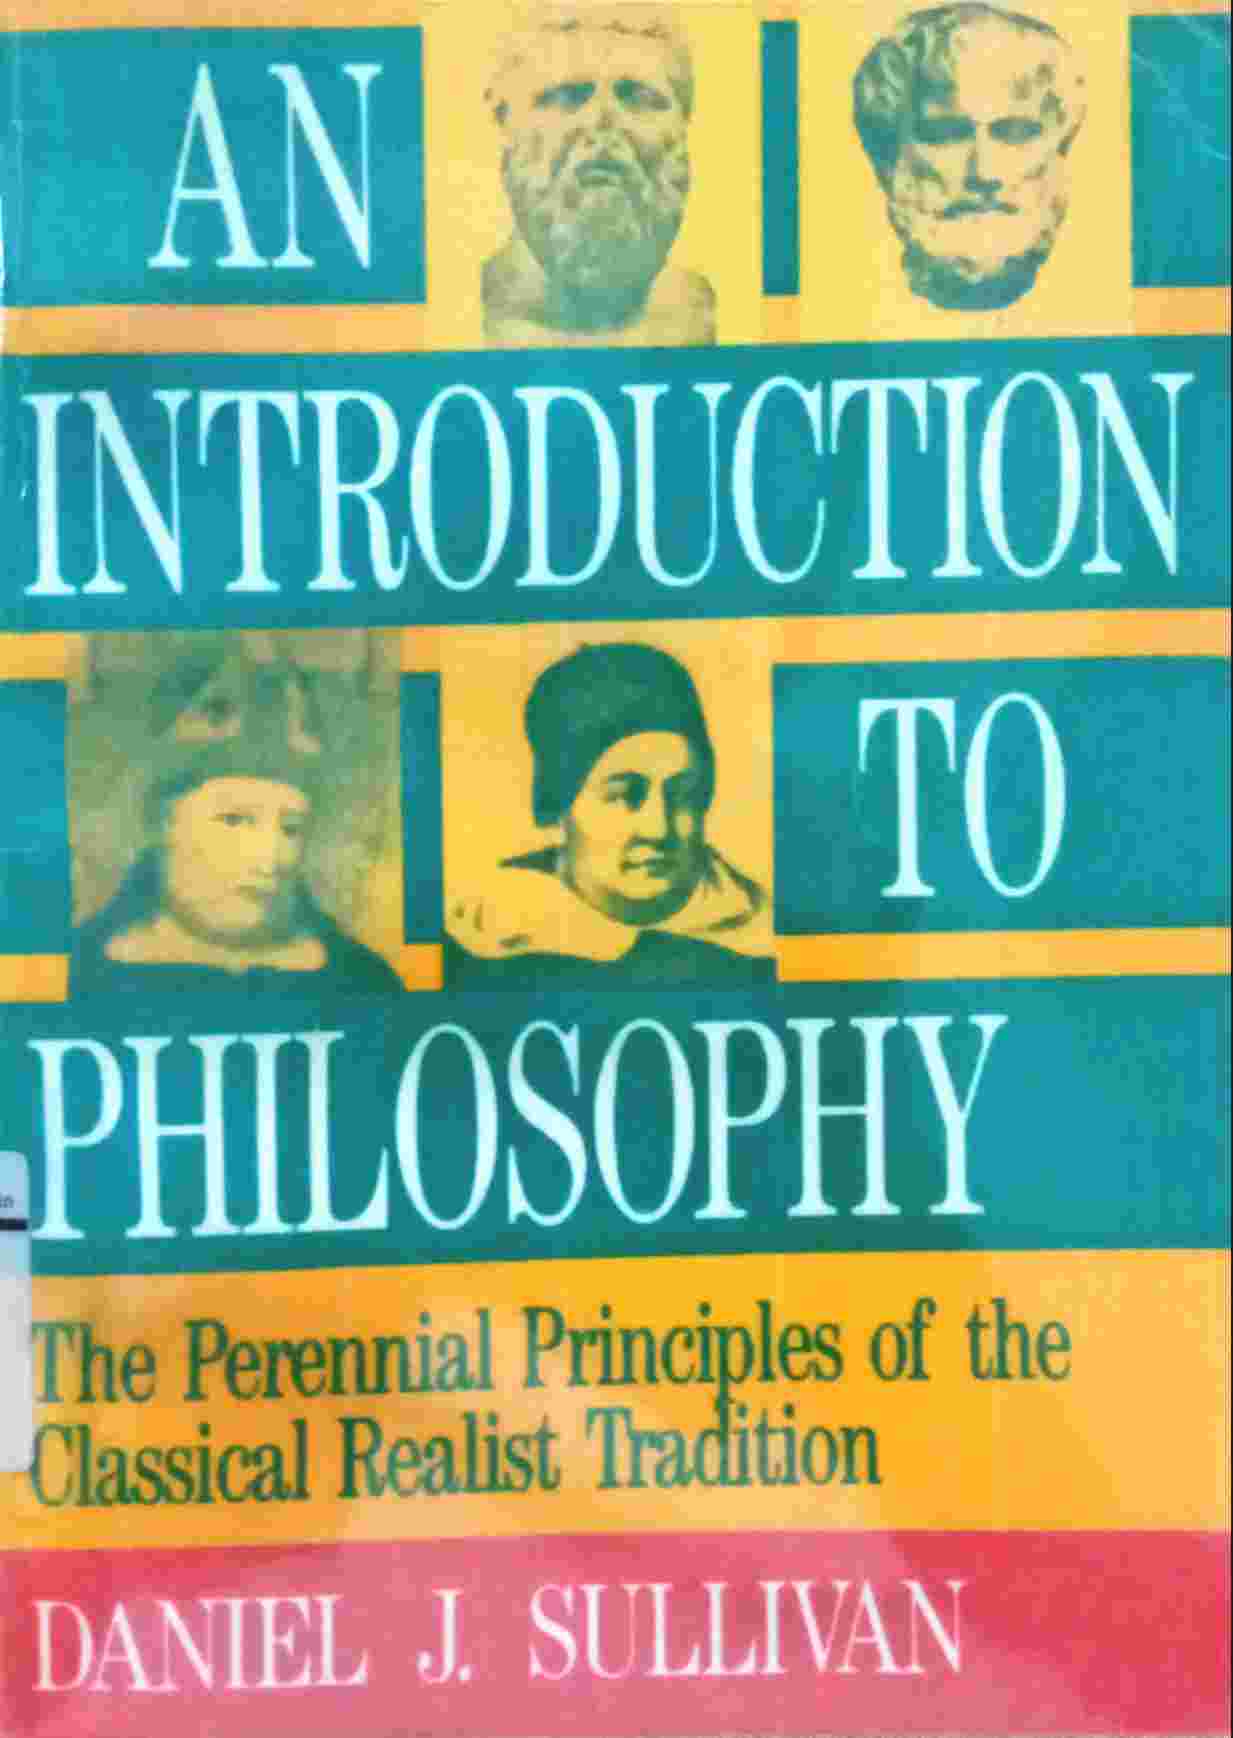 AN INTRODUCTION TO PHILOSOPHY: THE PERENNIAL PRINCIPLES OF THE CLASSICAL REALIST TRADITION